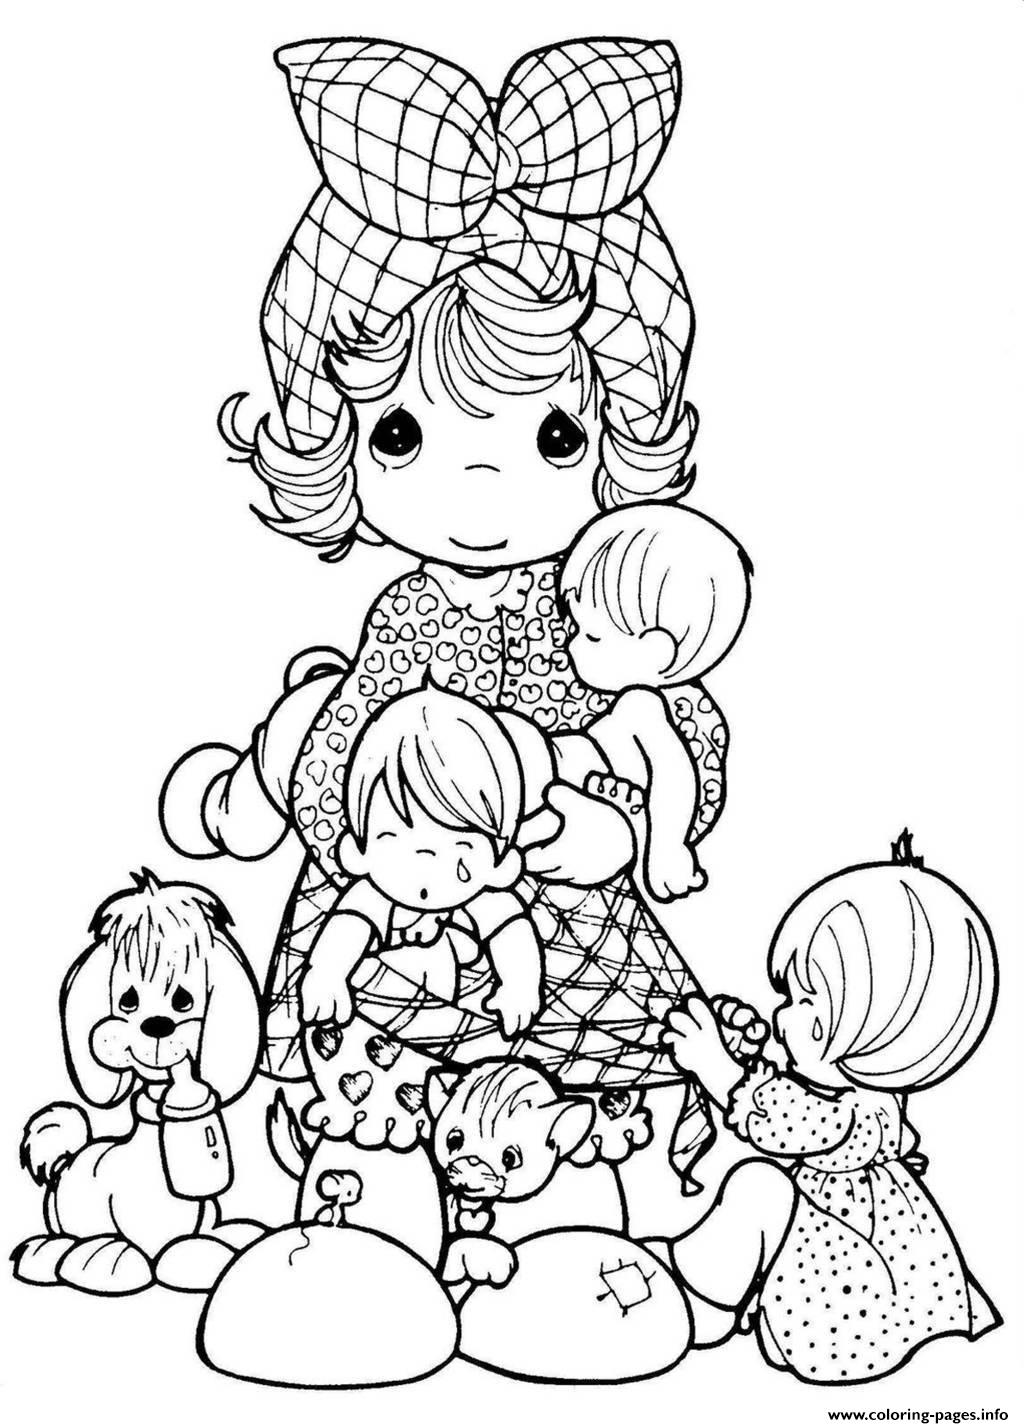 Adult Precious Moments coloring pages